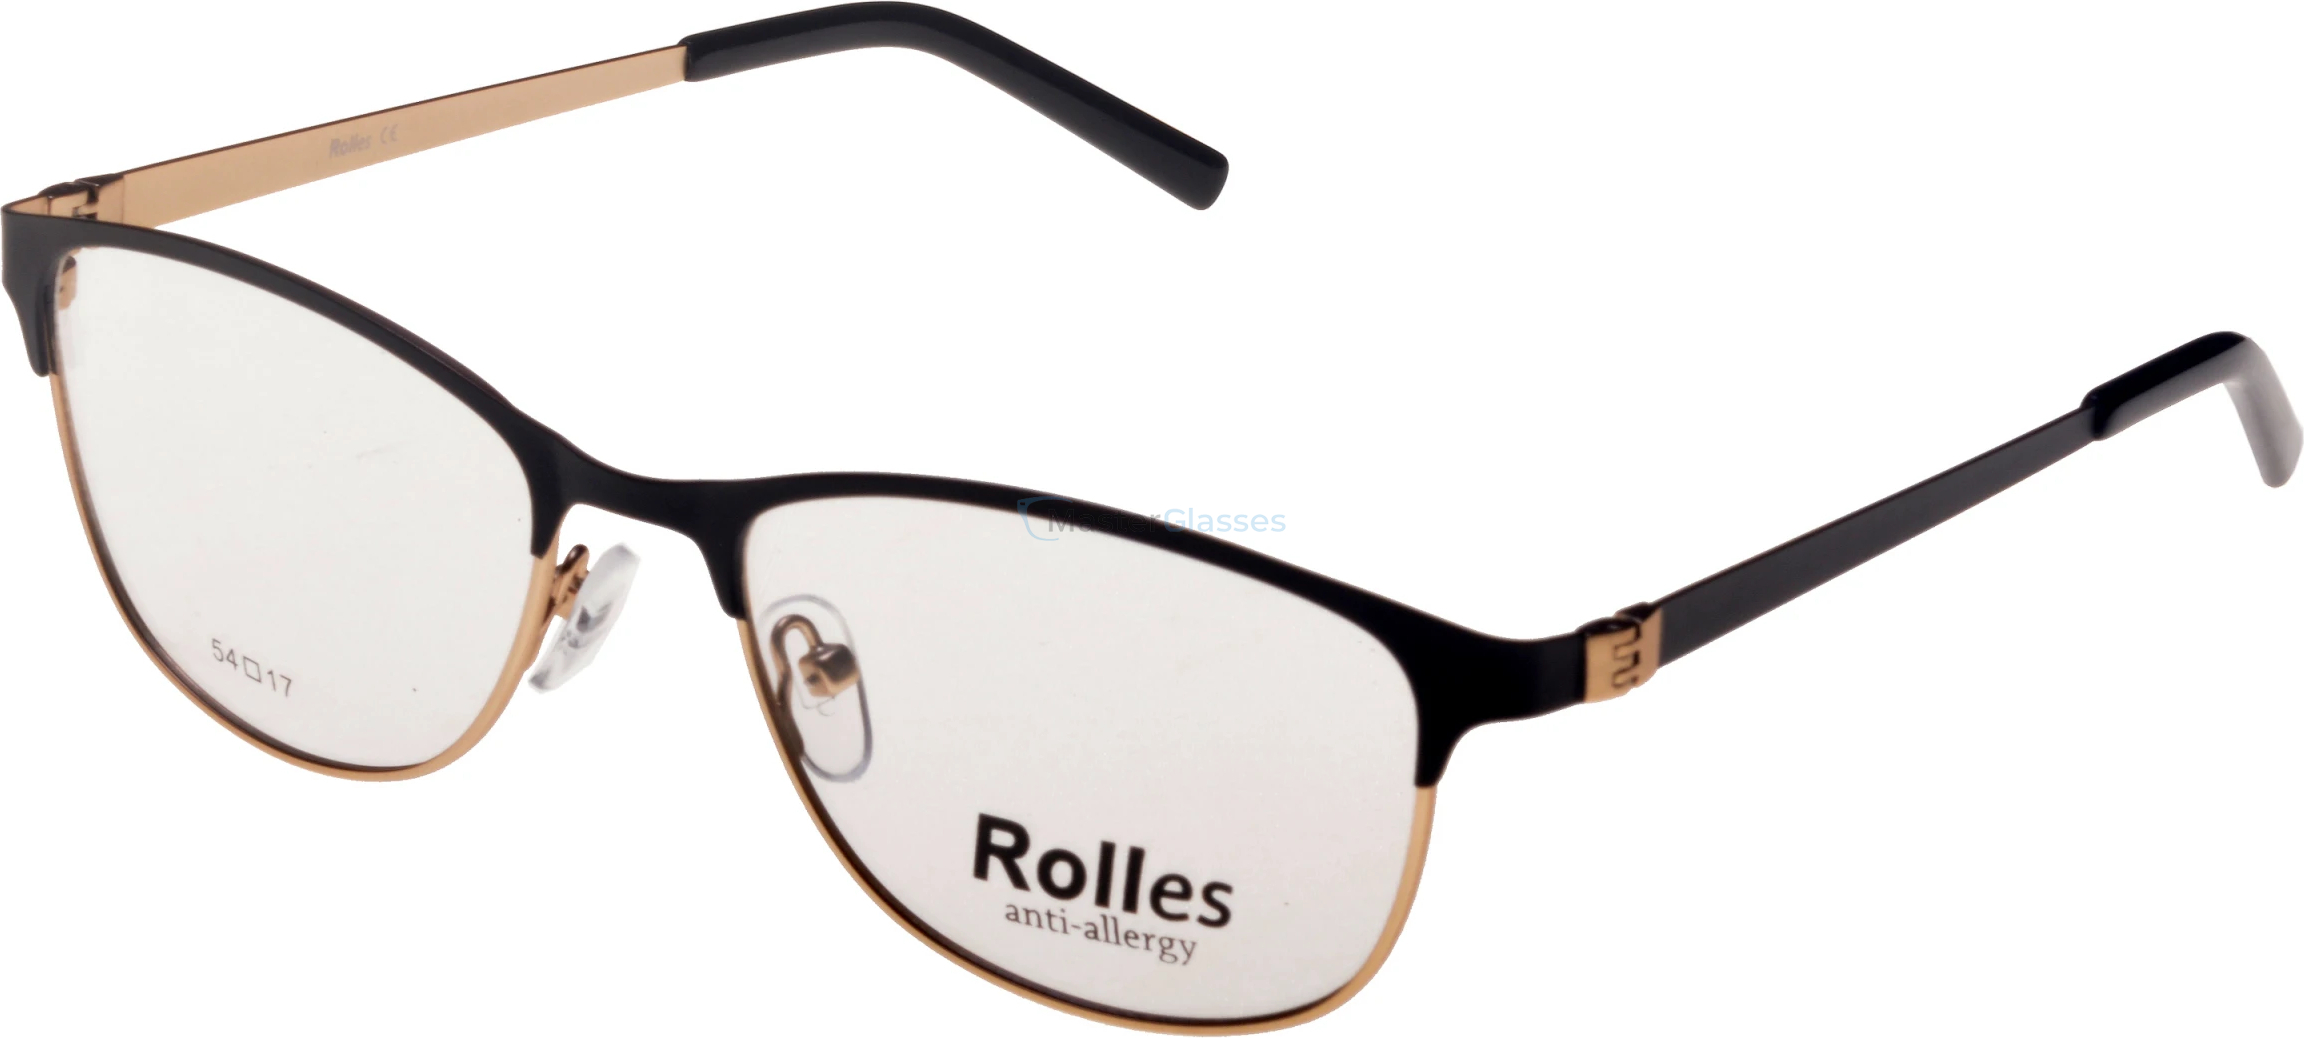  Rolles 724 05